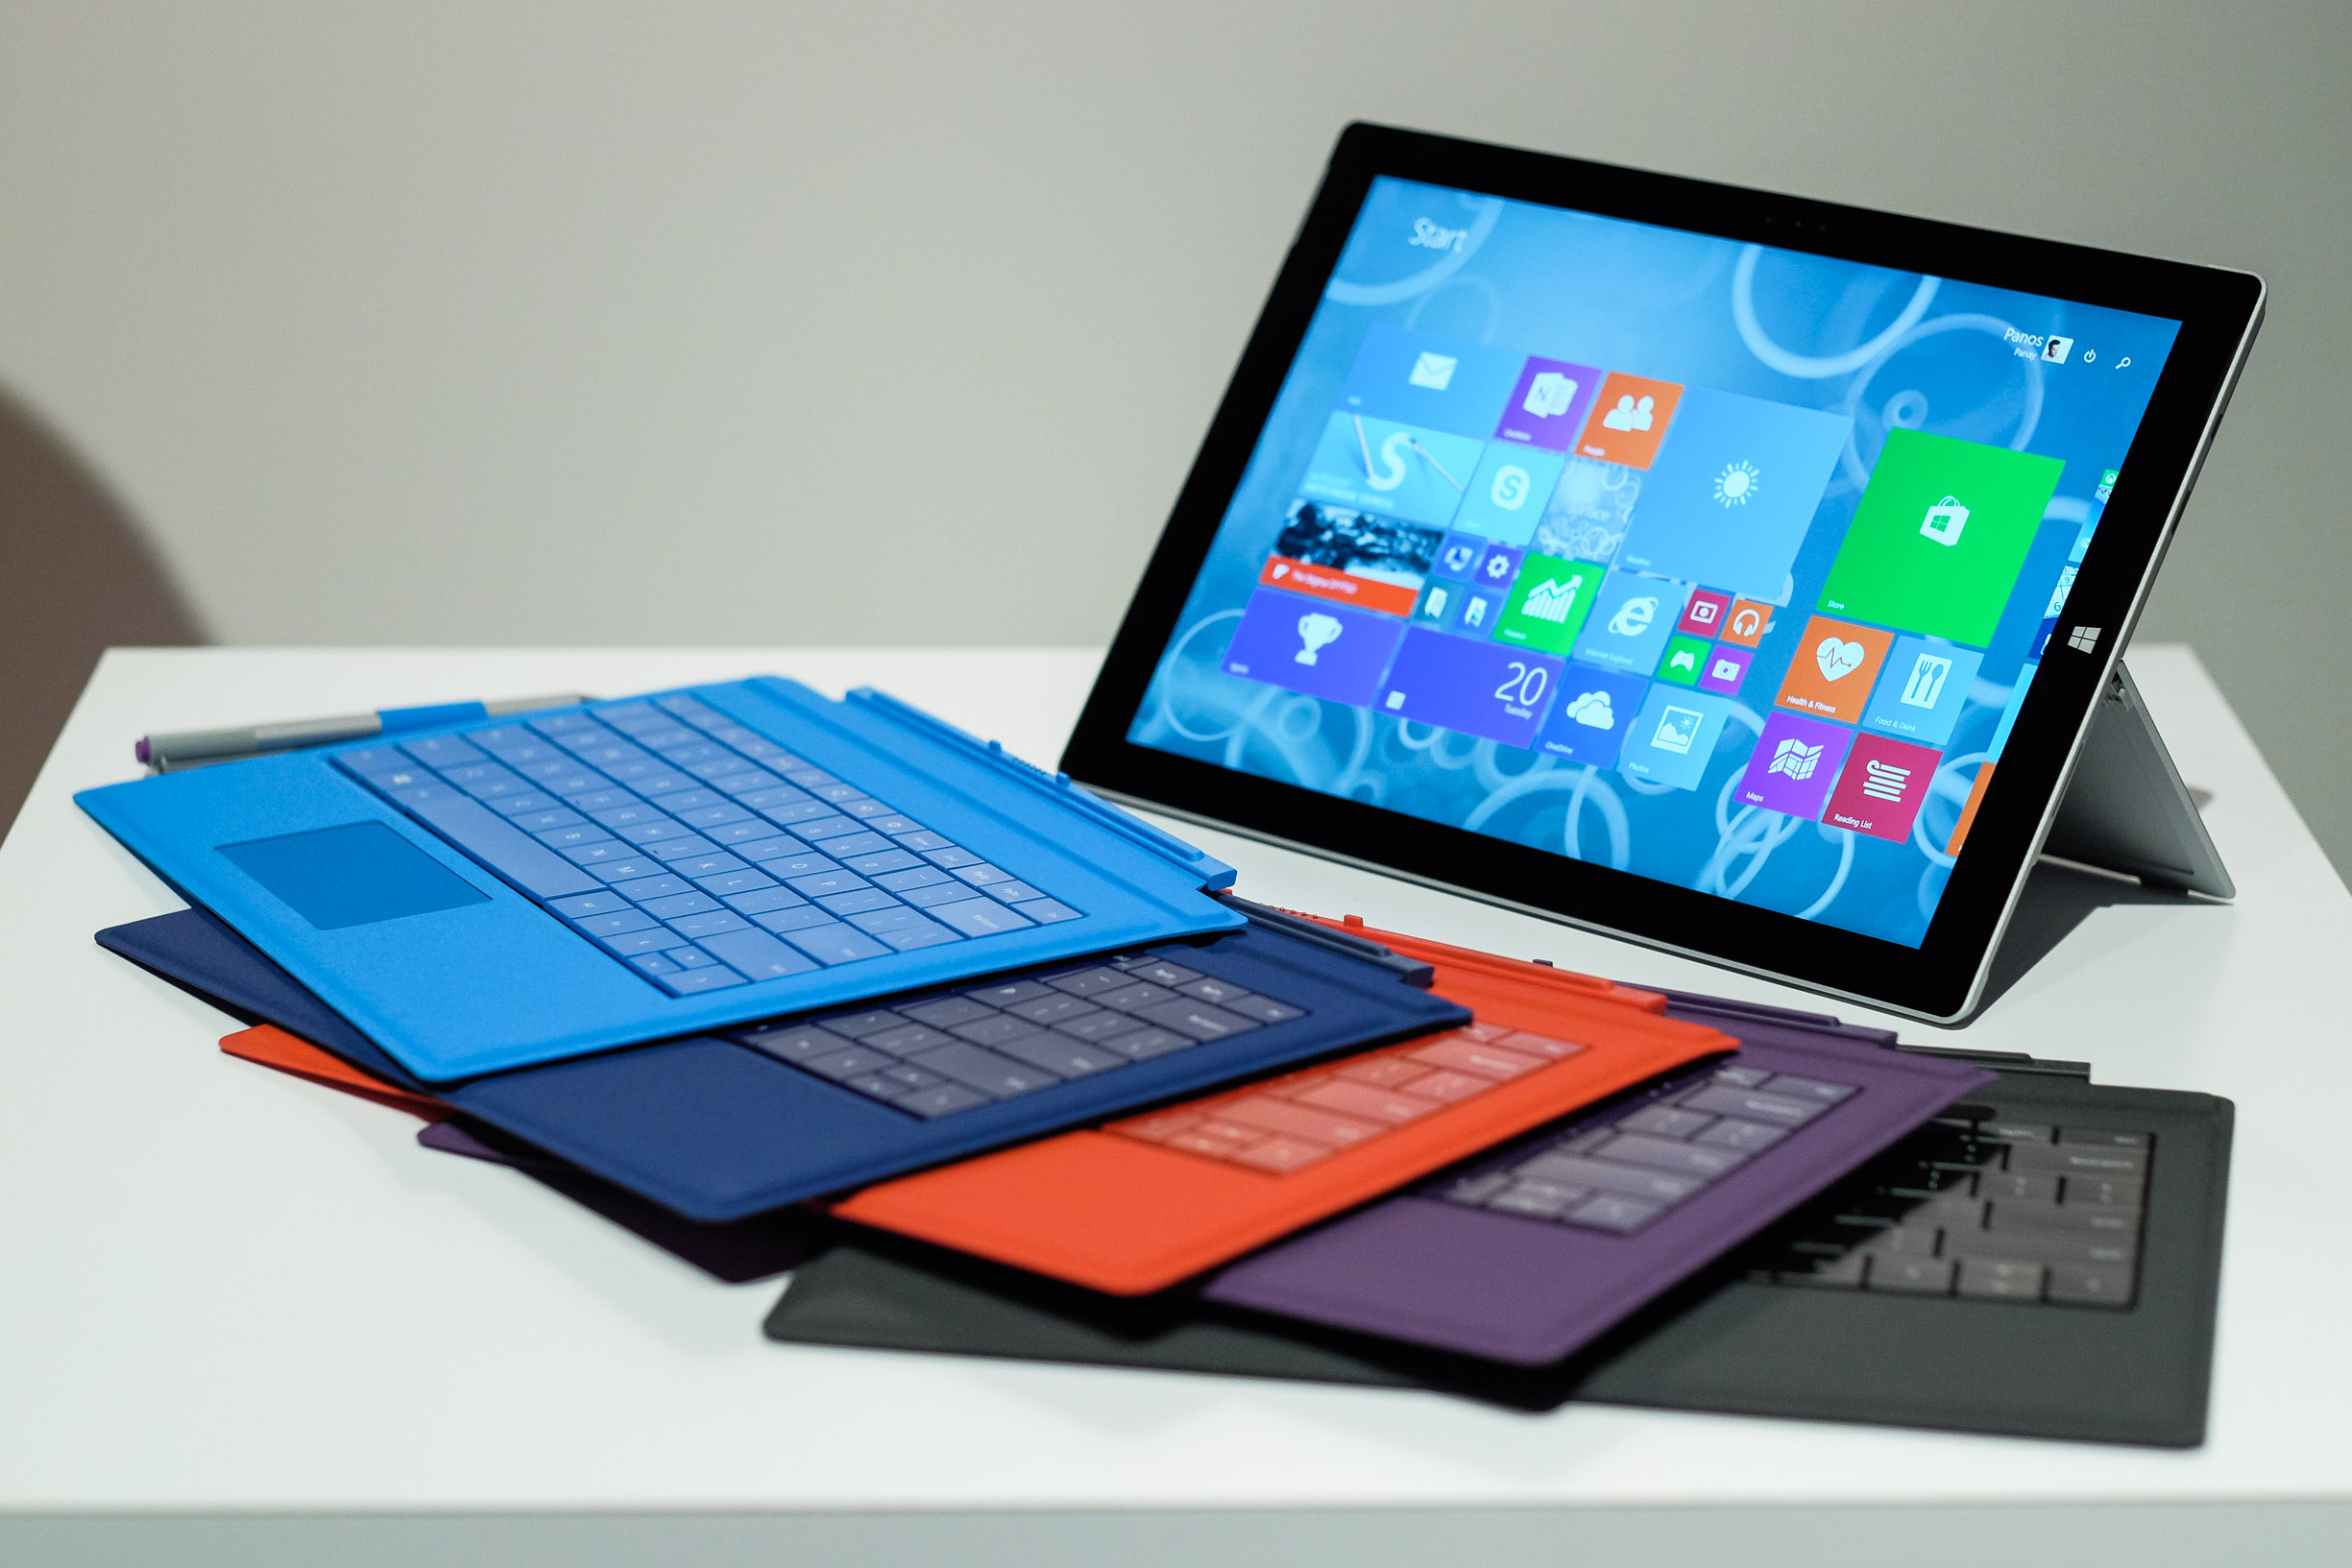 Microsoft Opens PreOrders for Surface Pro 3